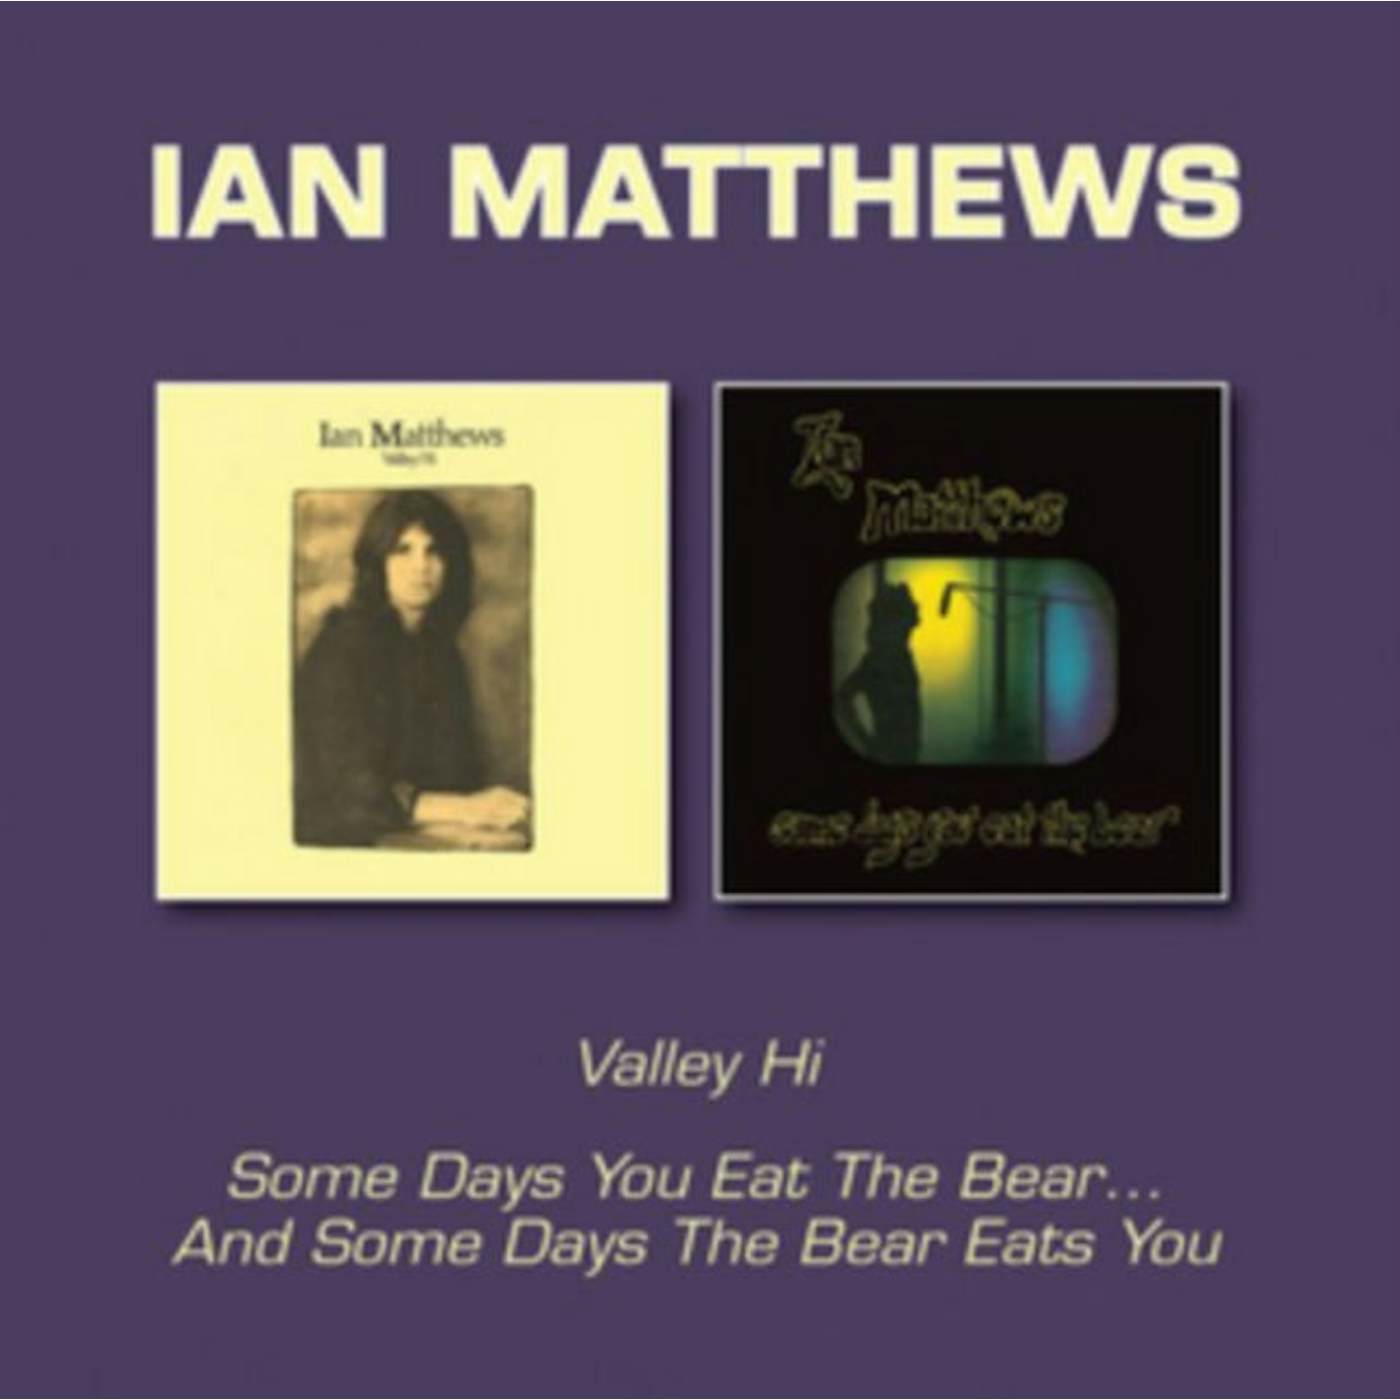 Iain Matthews CD - Valley Hi / Some Days You Eat The Bear... And Some Days The Bear